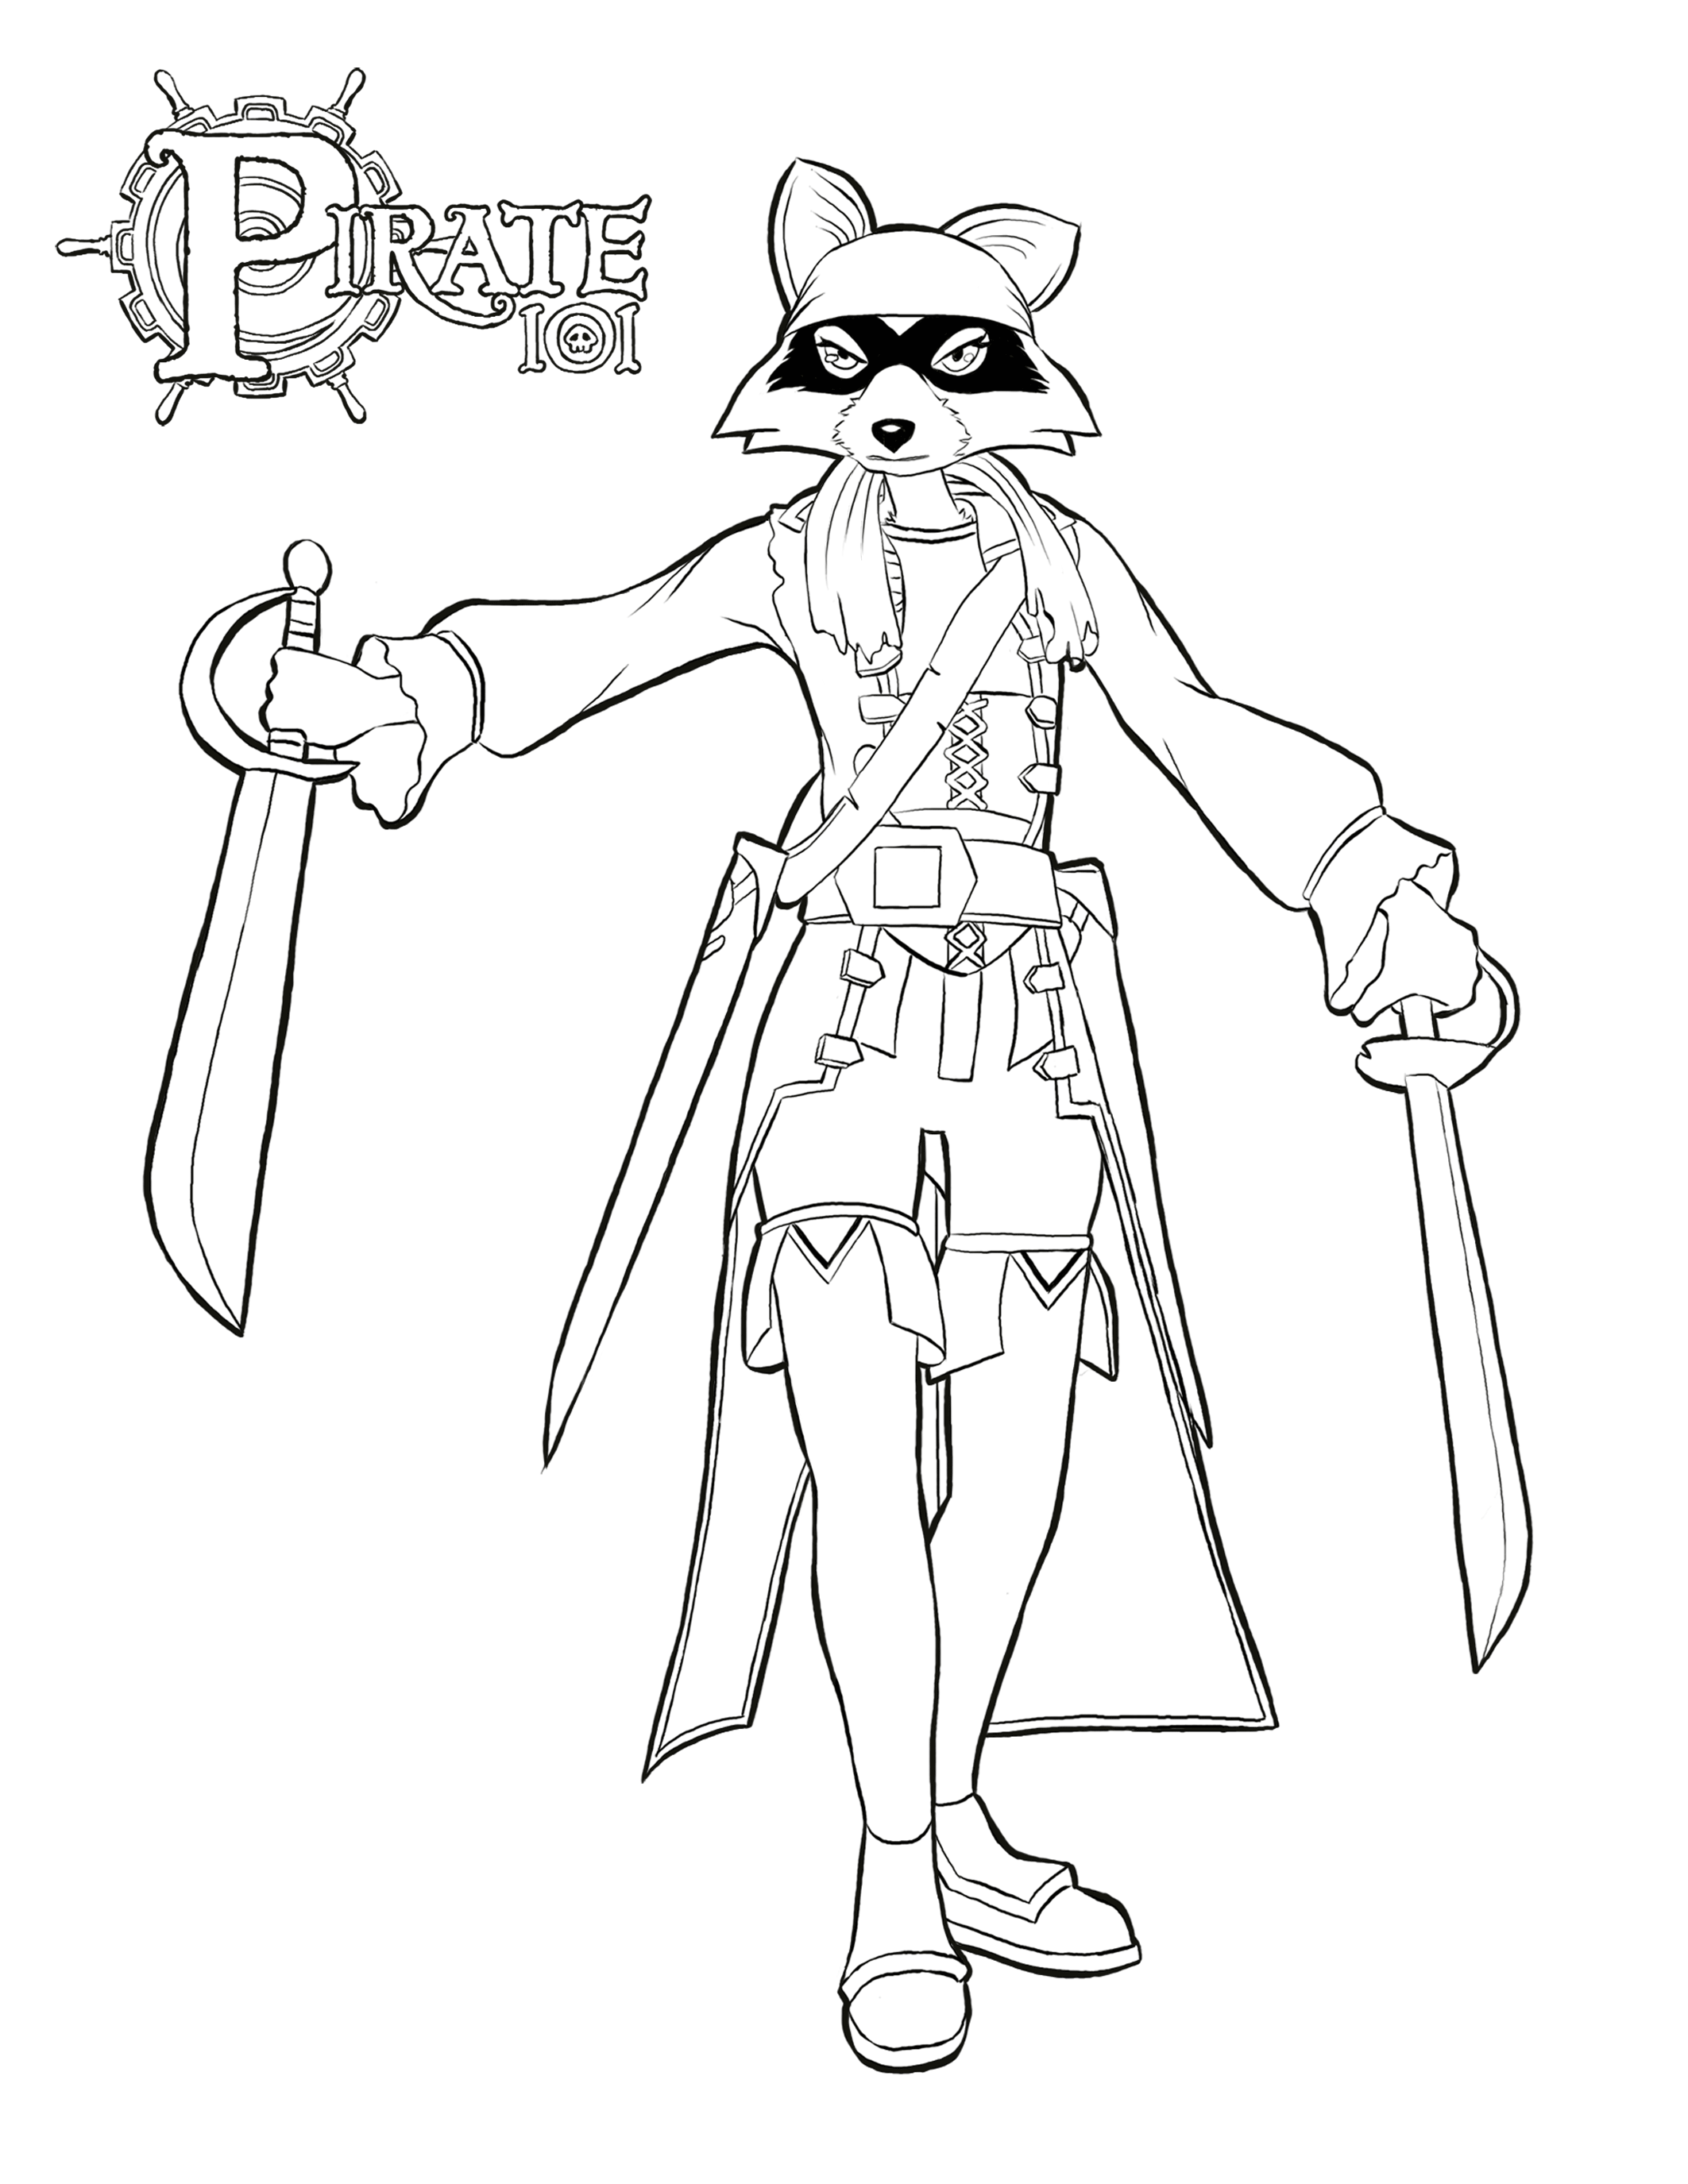 Mandrake, the leader of the Boggans coloring page printable game